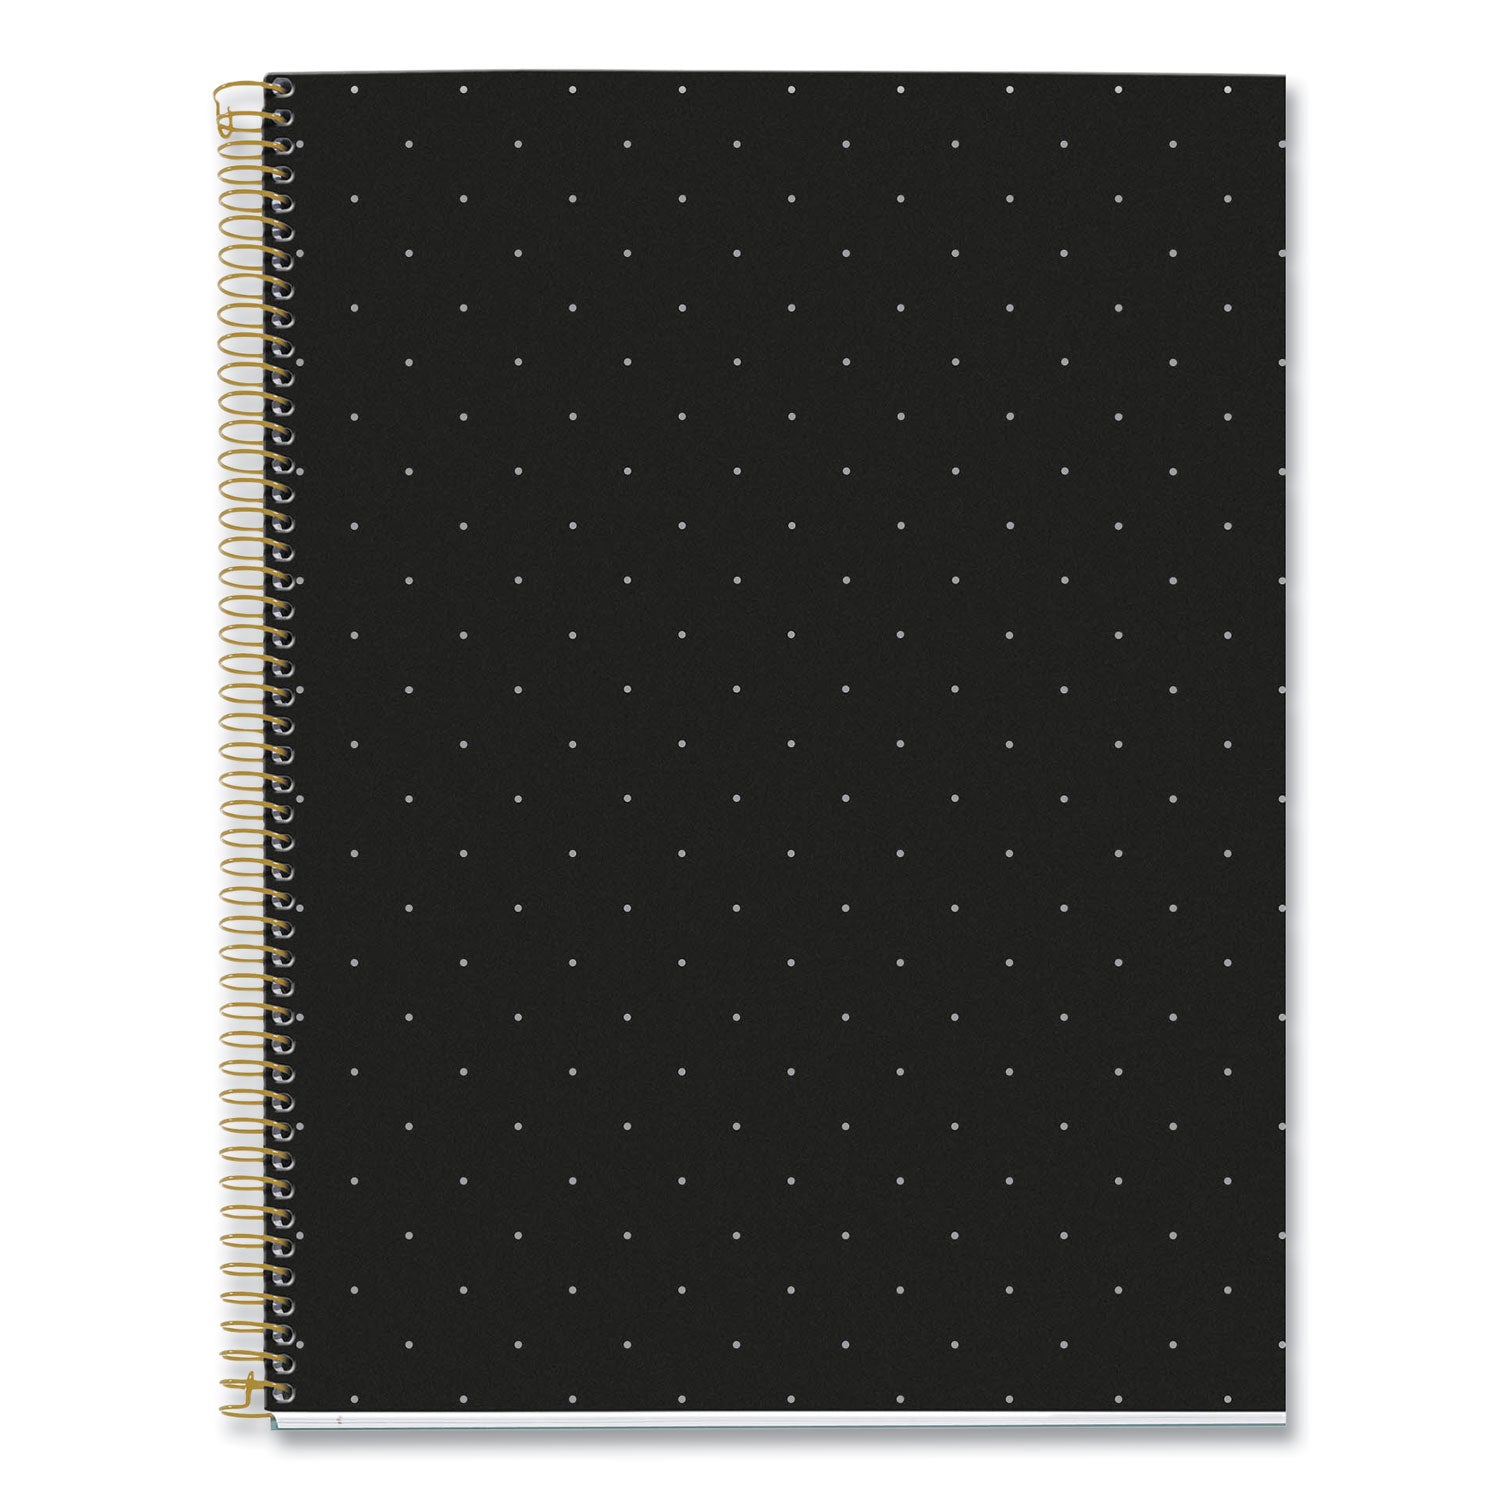 mr-m-fashion-notebook-4-subject-med-college-rule-black-dots-cover-120-11-x-85-sheets-5-ct-ships-in-4-6-business-days_roa48293cs - 2